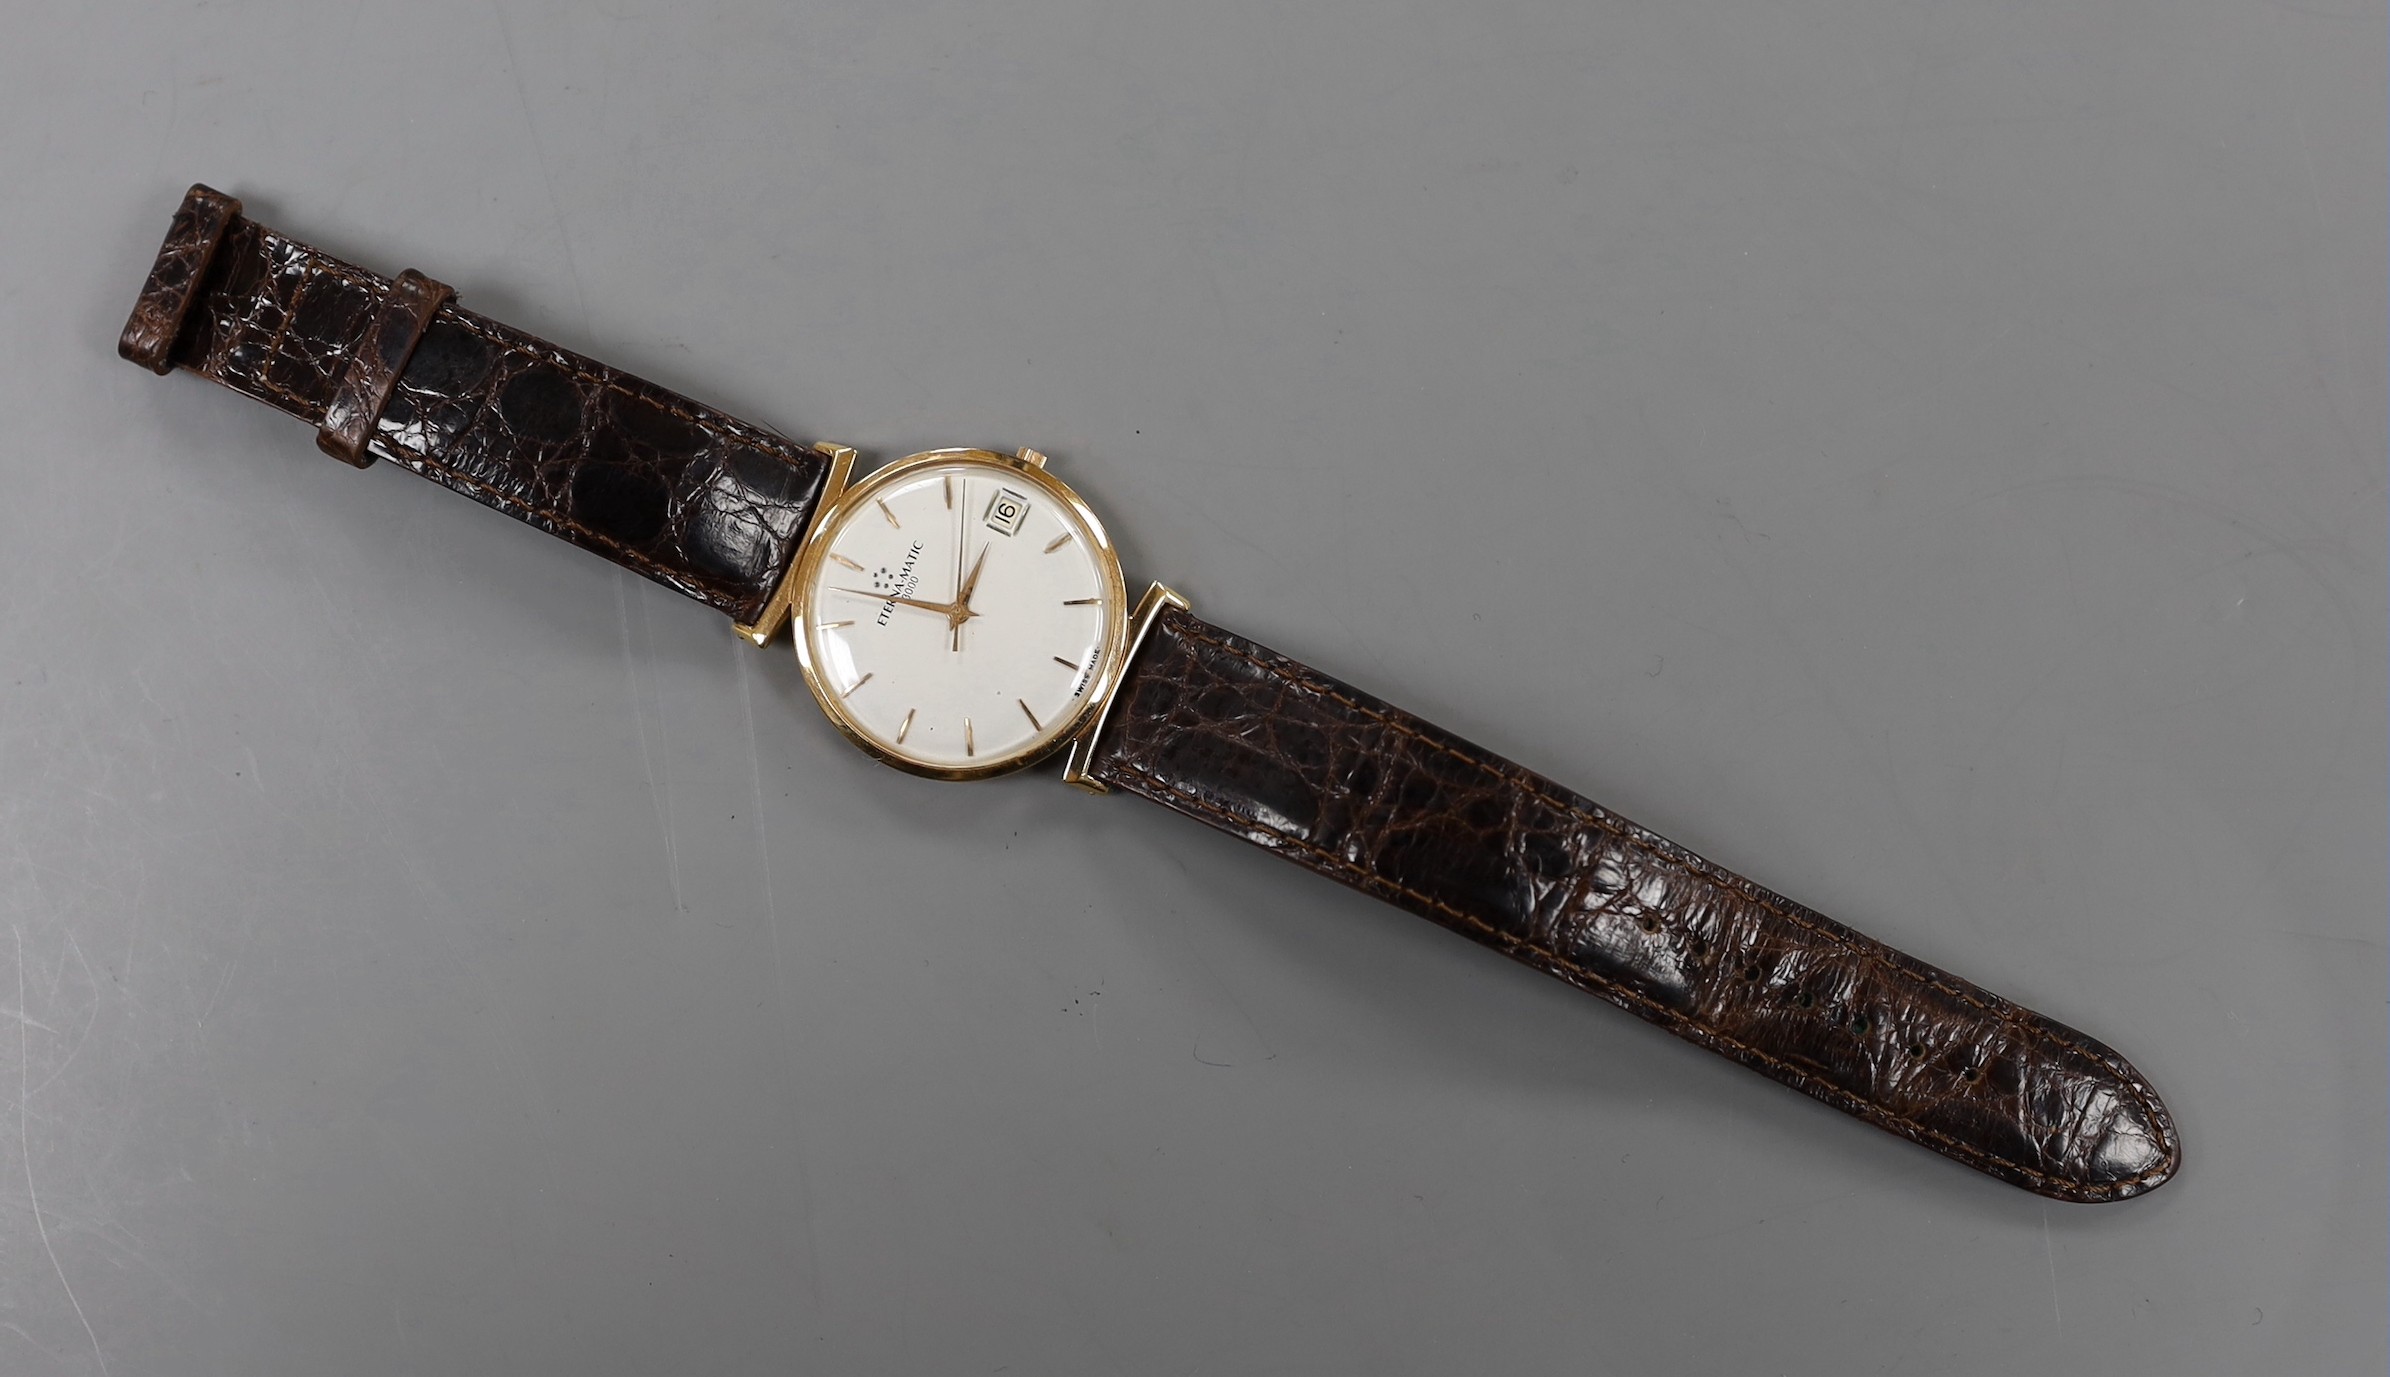 A gentleman's yellow metal Eterna-Matic wrist watch, with date aperture, on associated leather strap (lacking buckle), with baton numerals.